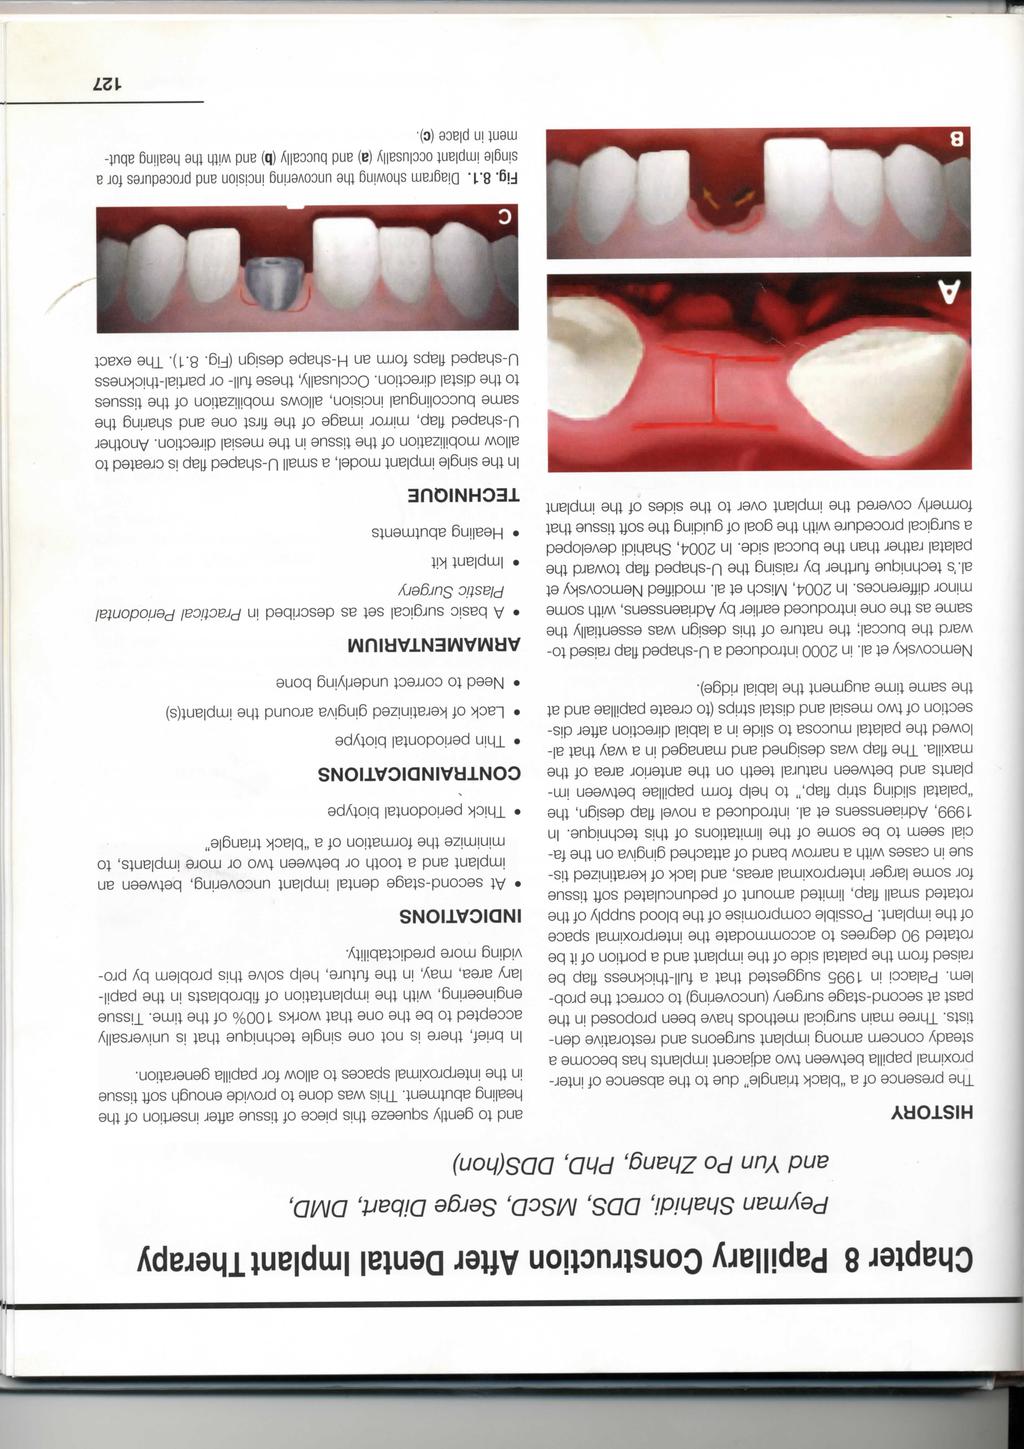 Chapter 8 Papillary Construction After Dental Implant Therapy Peyman Shahidi, DOS, MScD, Serge Dibart, DMD, and Yun Po Zhang, PhD, DDS(hon) HISTORY The presence of a "black triangle" due to the